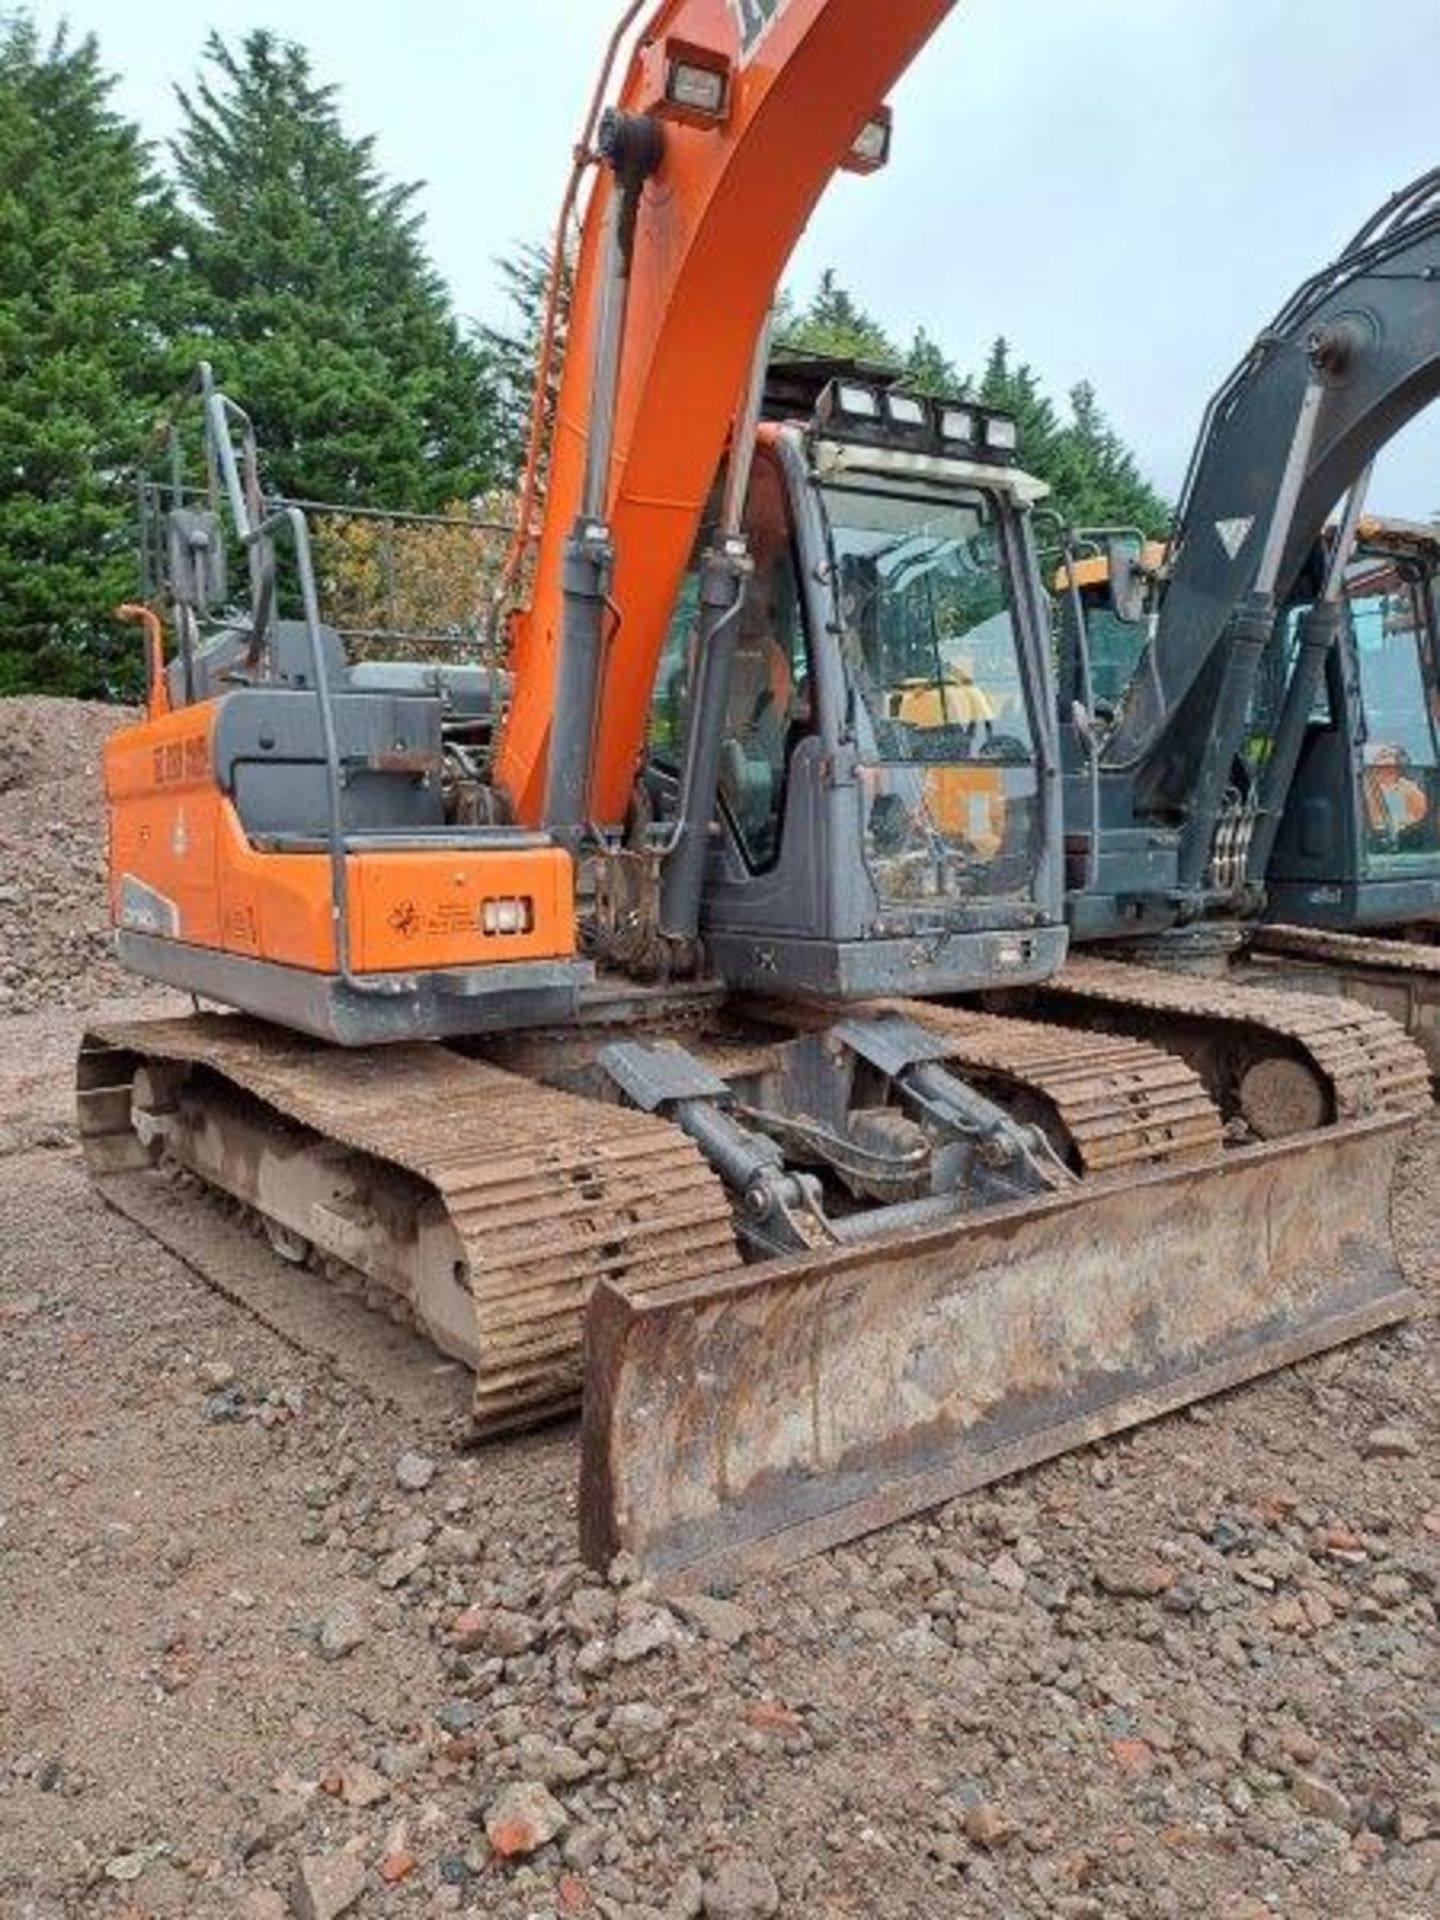 Doosan DX140LC-5 14t excavator, serial no. DHKCEBBRCG0001308, Year: 2017, Hours: 6,670, Key: 1, with - Image 12 of 21